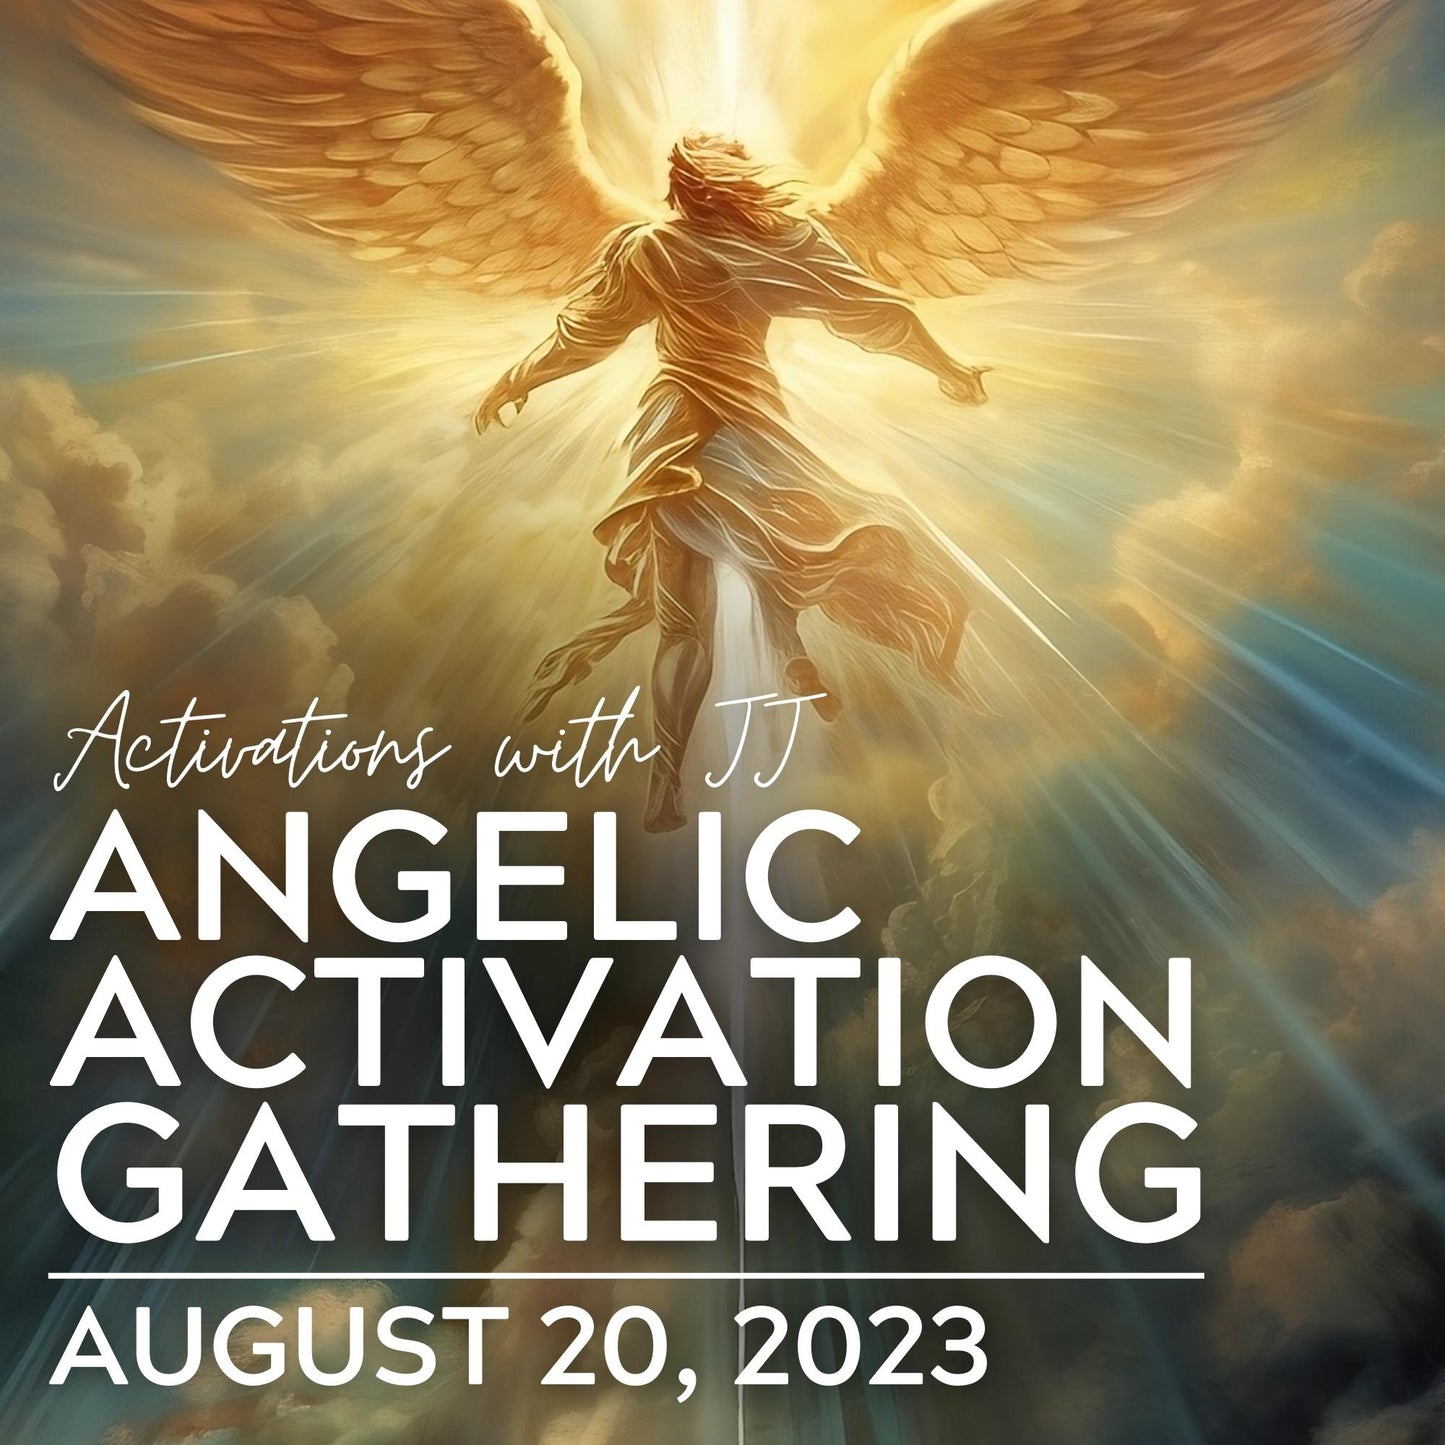 Angelic Activation Gathering (MP3 Recording) | August 20, 2023